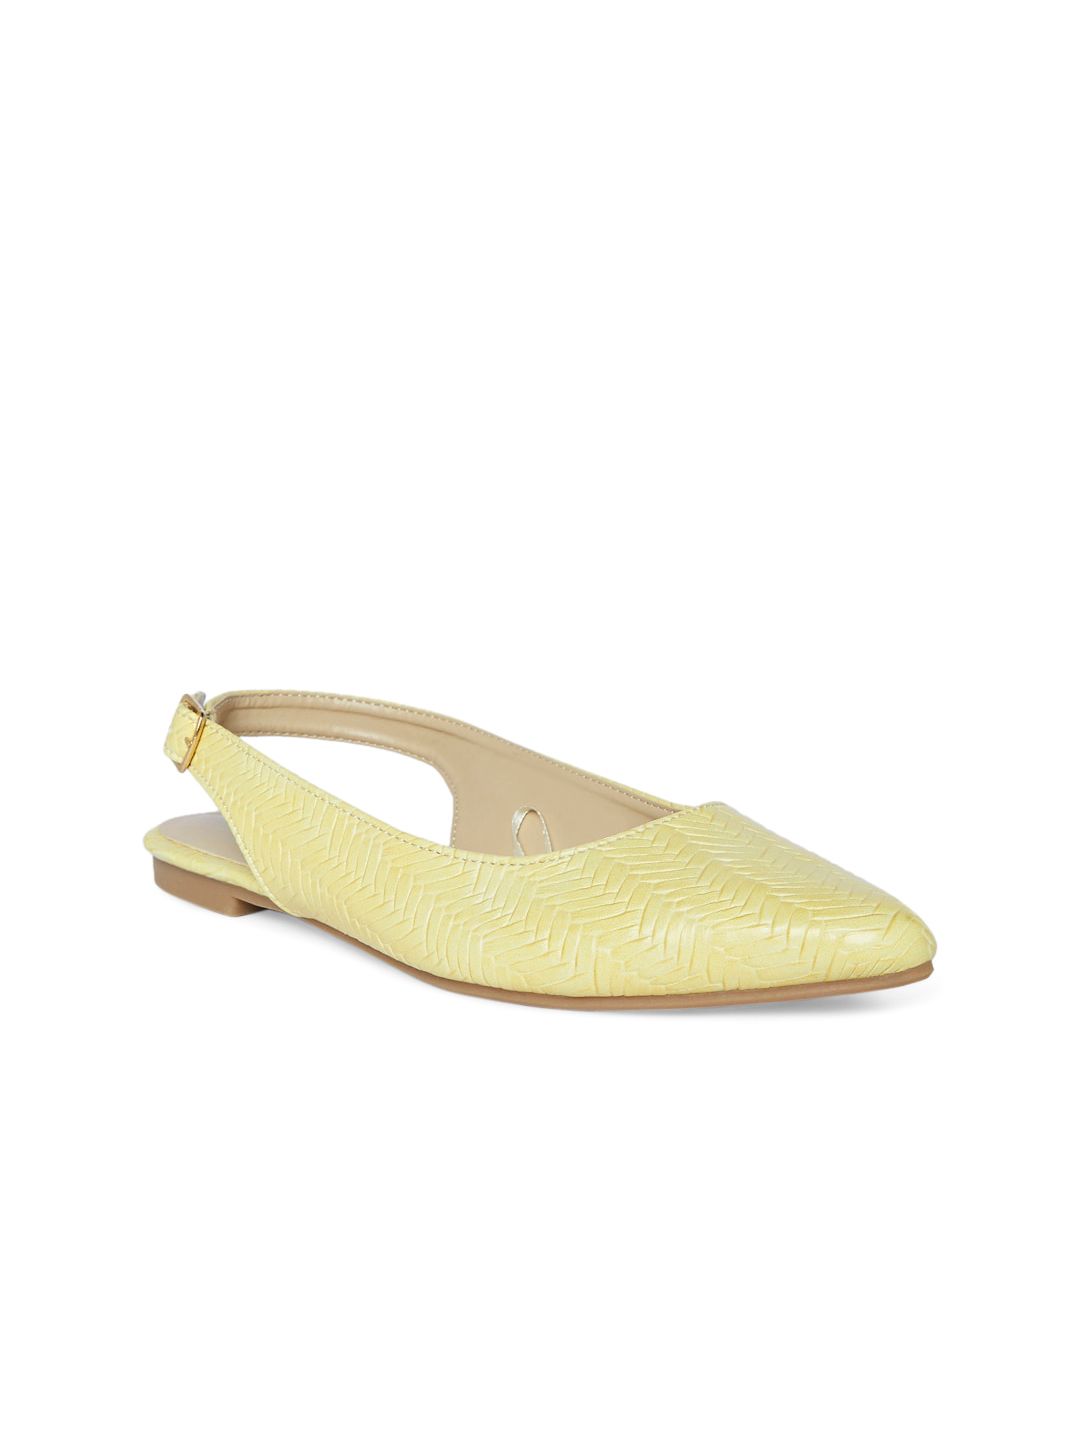 Forever Glam by Pantaloons Woman Yellow Ballerinas Flats Price in India